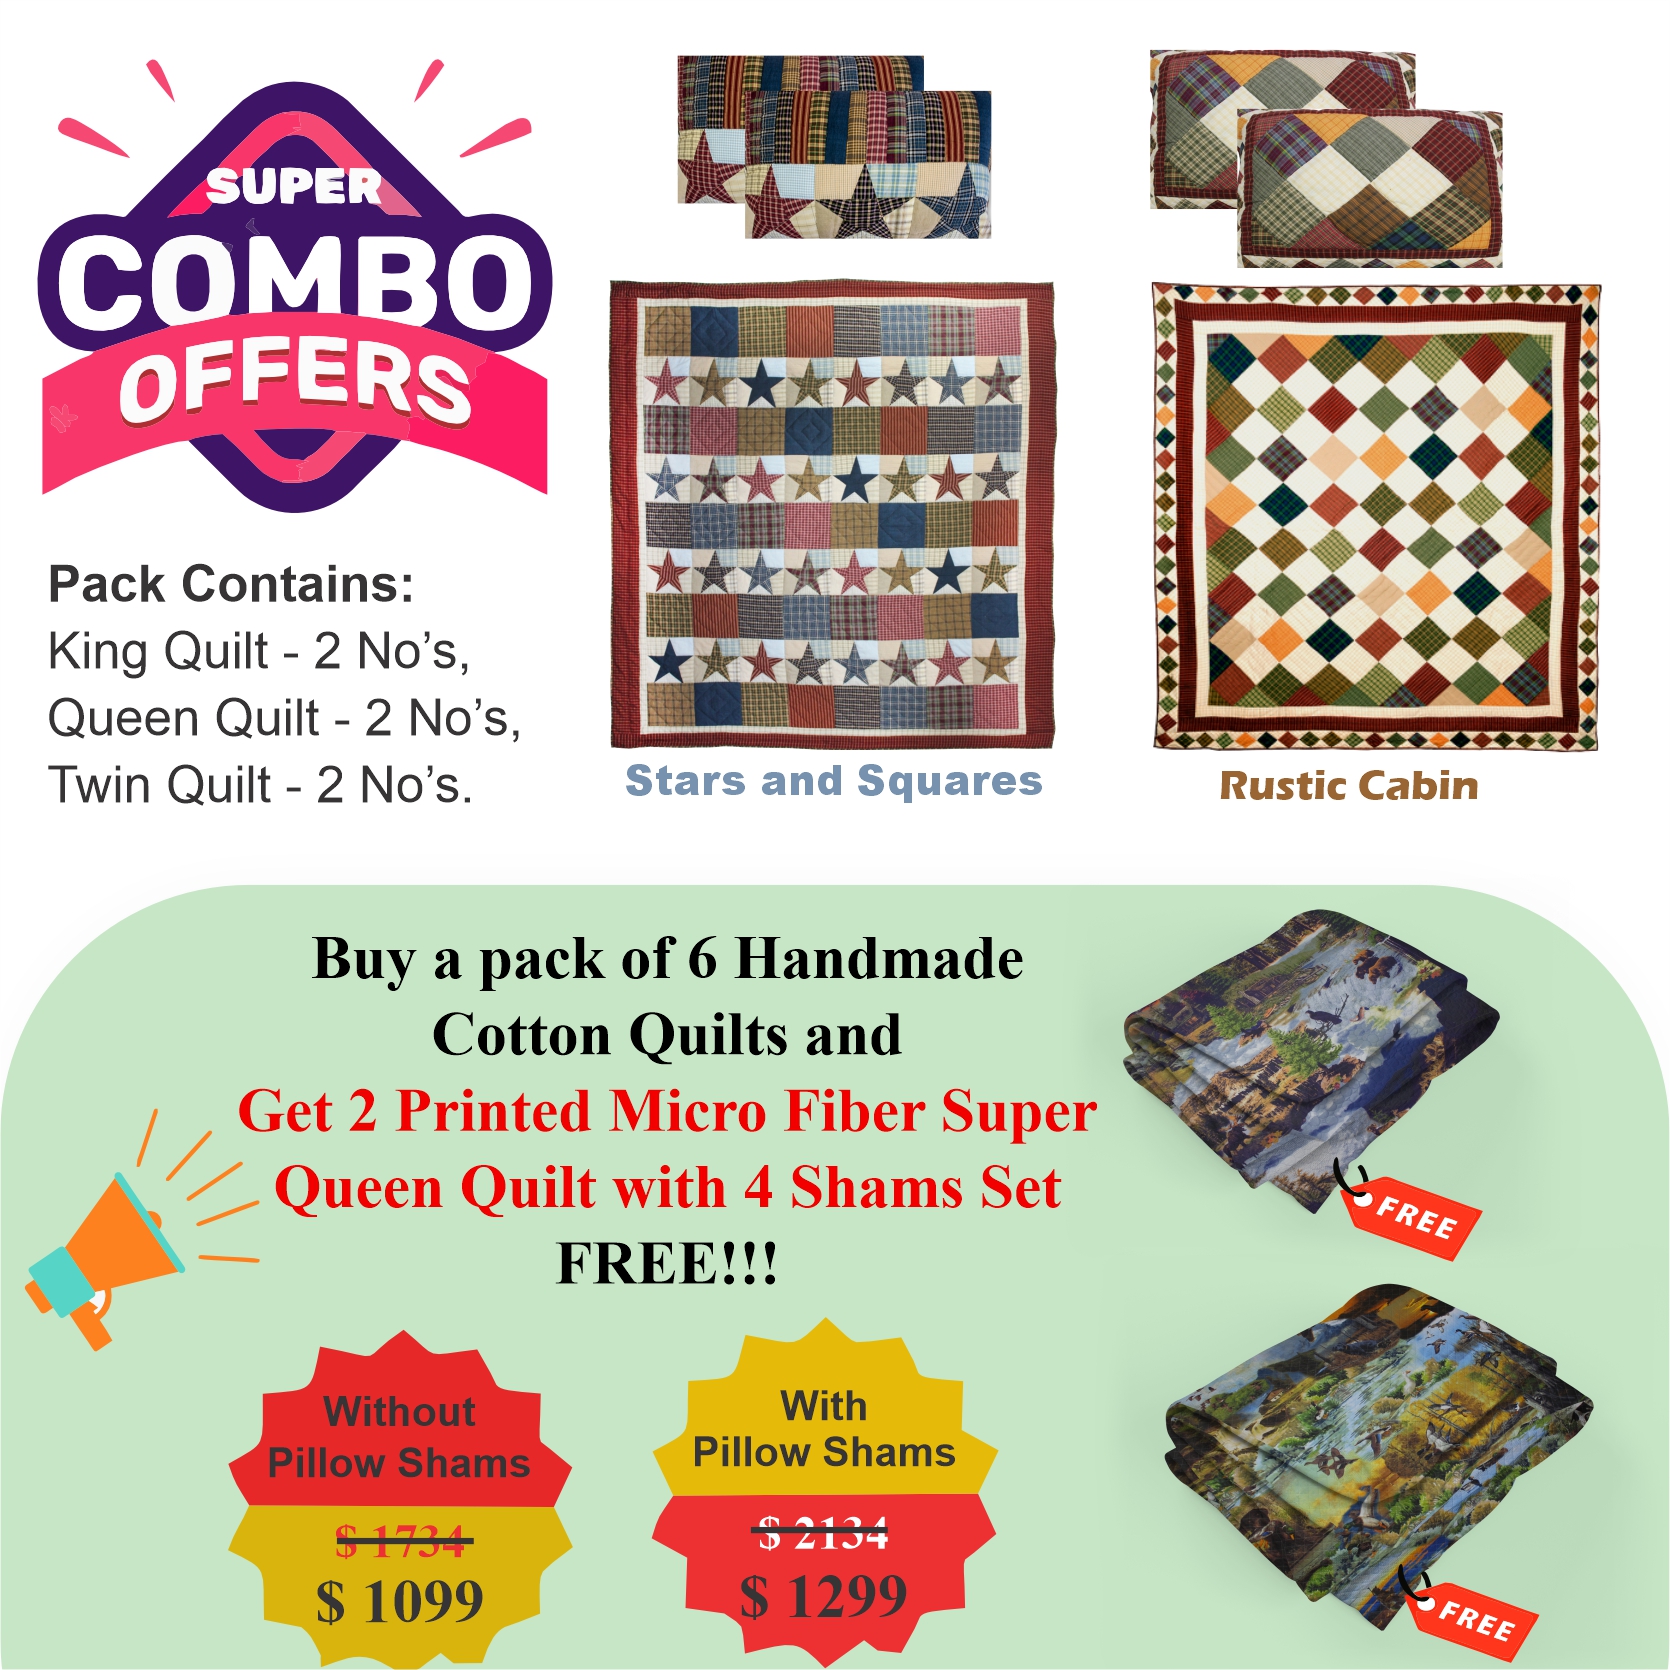 Rustic Cabin /Stars and Squares  - Pack of 6 handmade cotton quilts | Matching Pillow shams | Buy 6 cotton quilts and get 2 Printed Microfiber Super Queen Quilt with 4 Shams